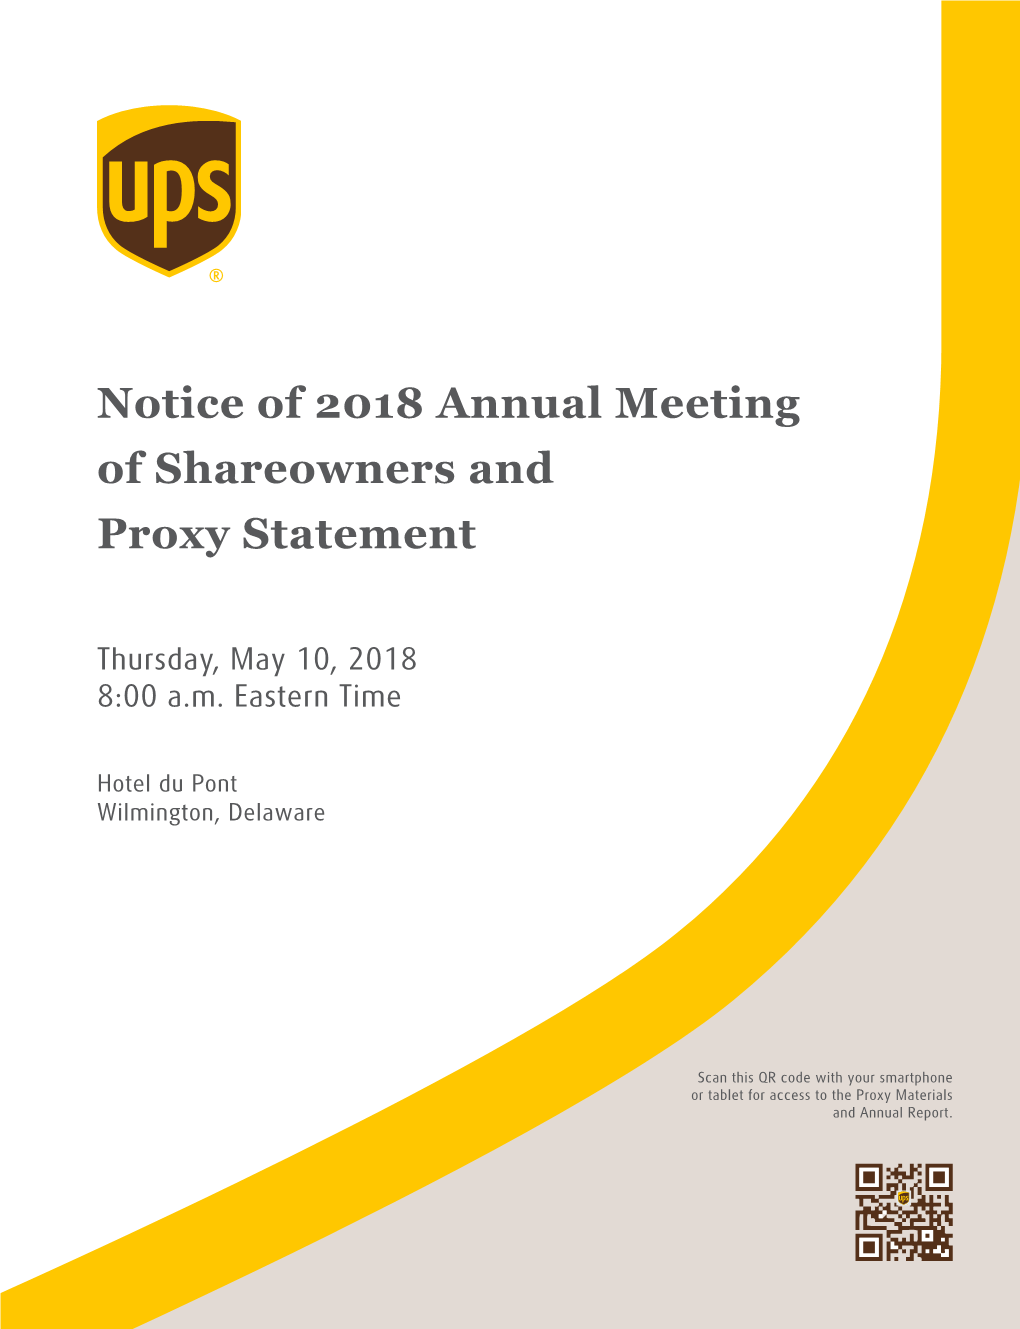 Notice of 2018 Annual Meeting of Shareowners and Proxy Statement